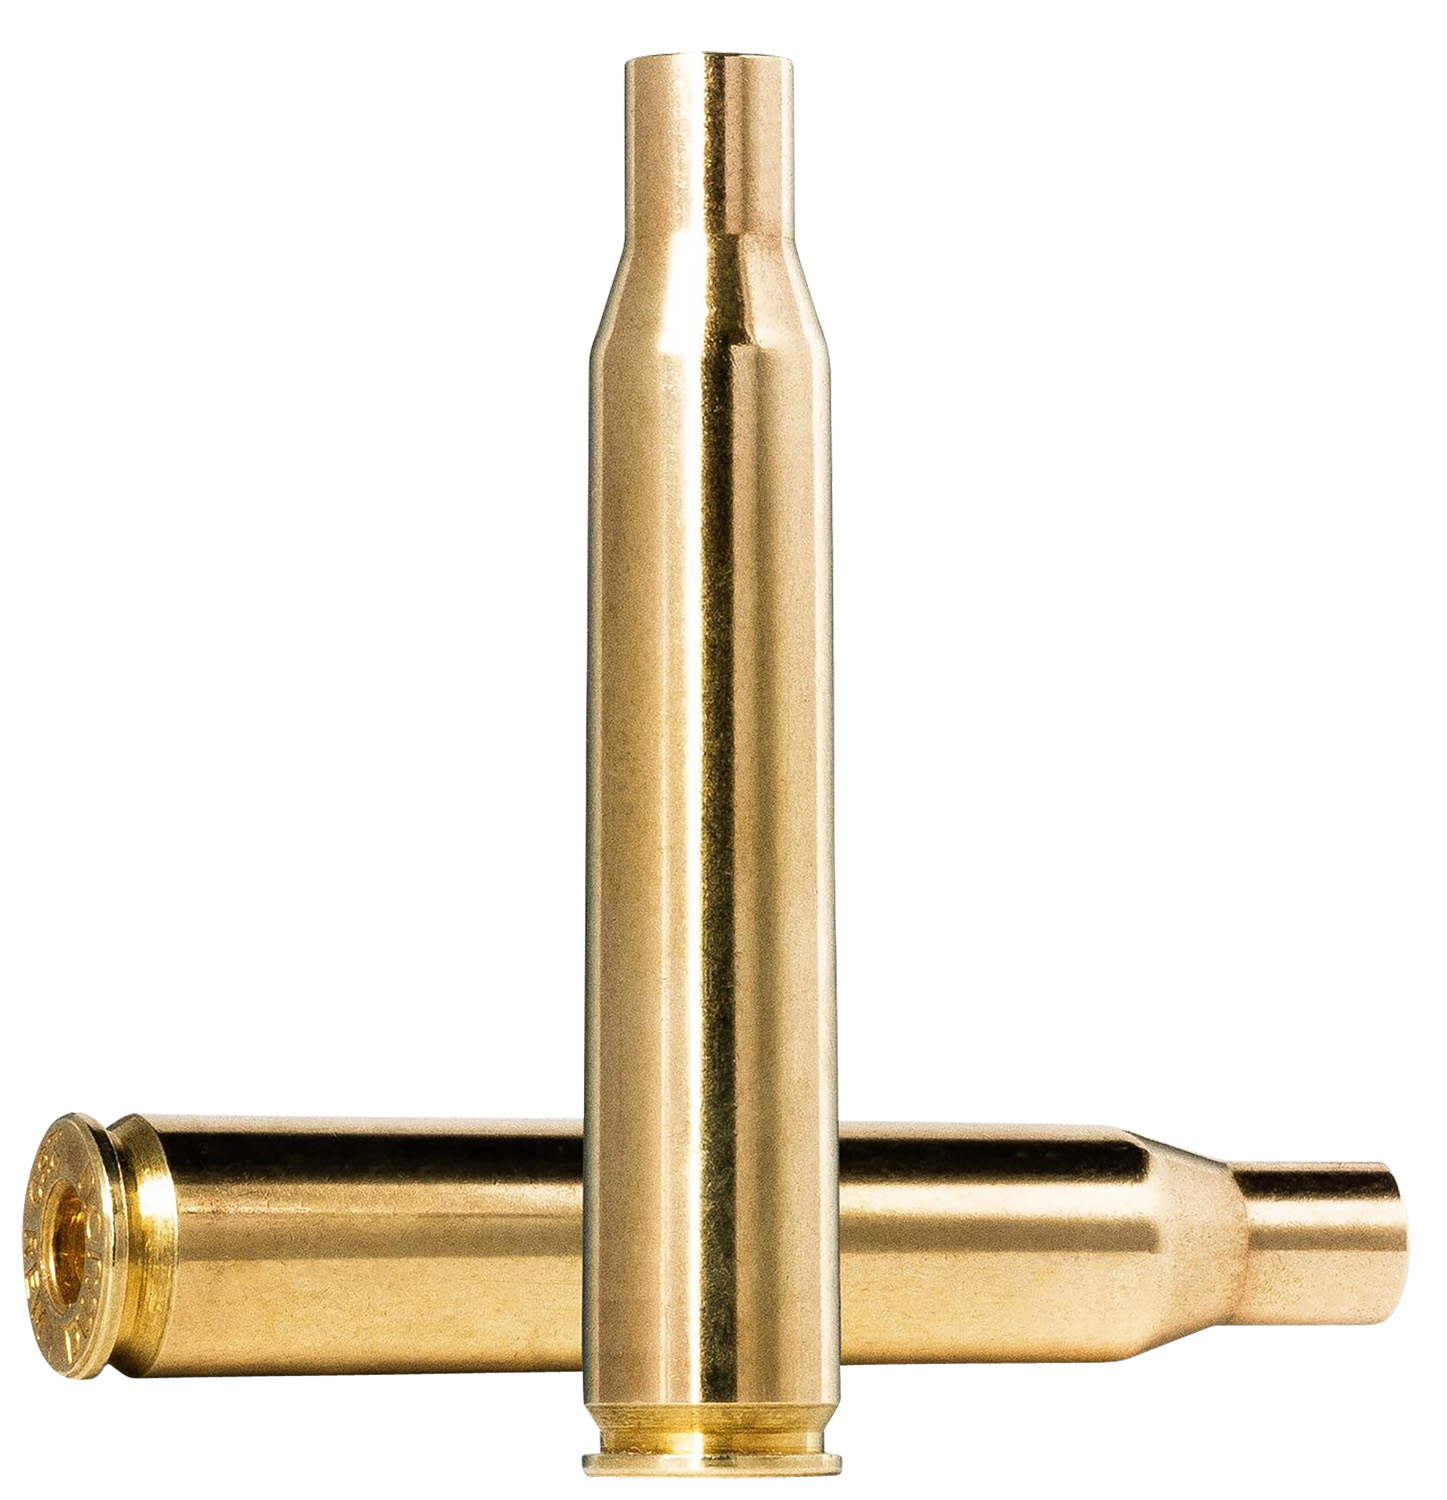 Norma Ammunition 20257017 Dedicated Components Reloading .220 Swift Rifle Brass 50 Per Box